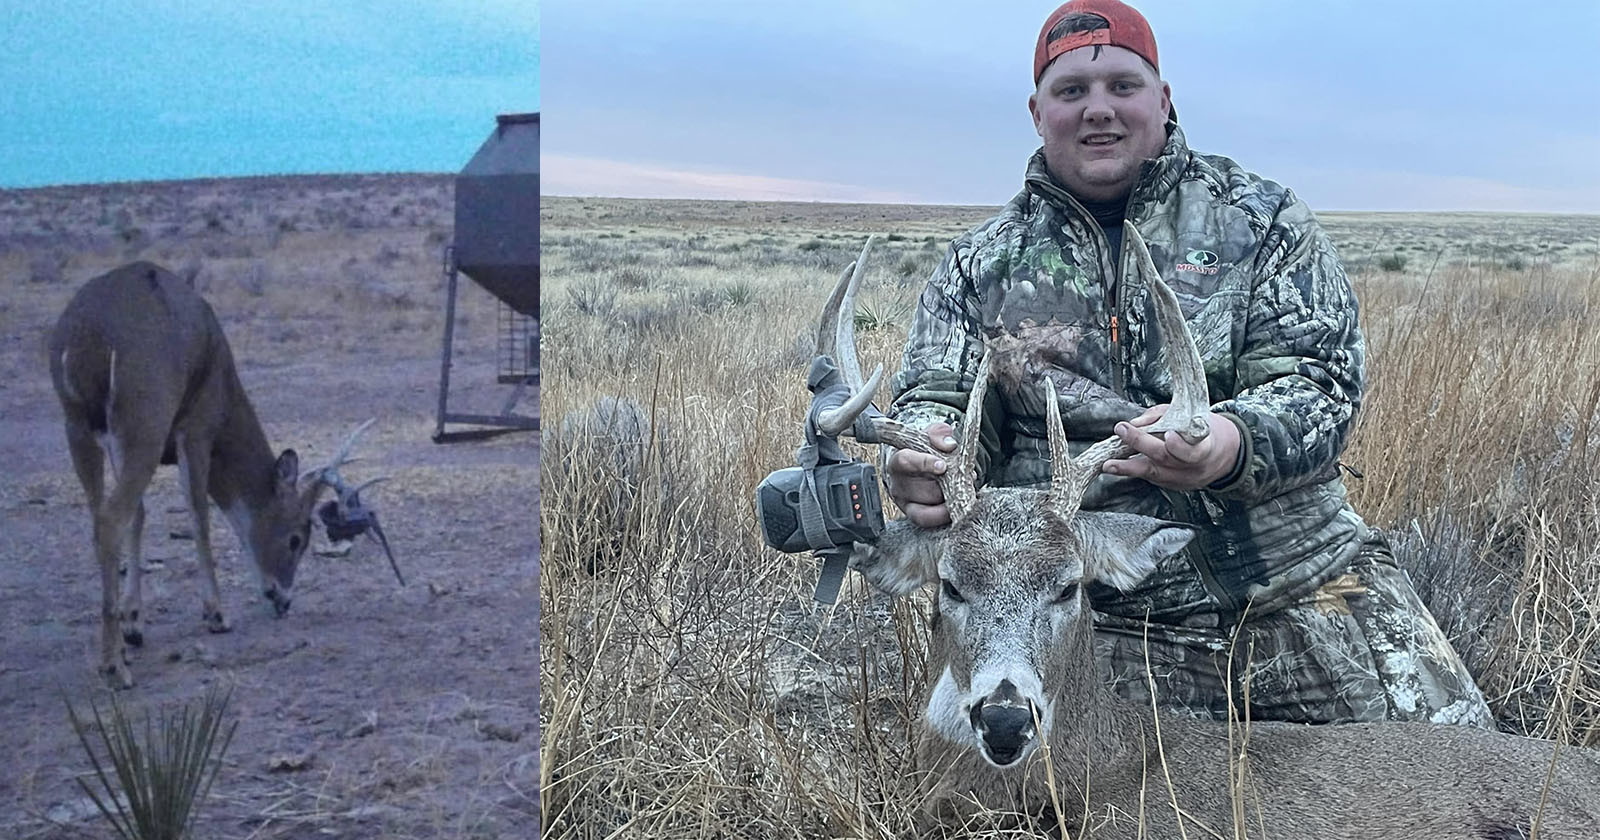 Deer Hunter Finds His Missing Camera Wrapped Around a Bucks Antlers